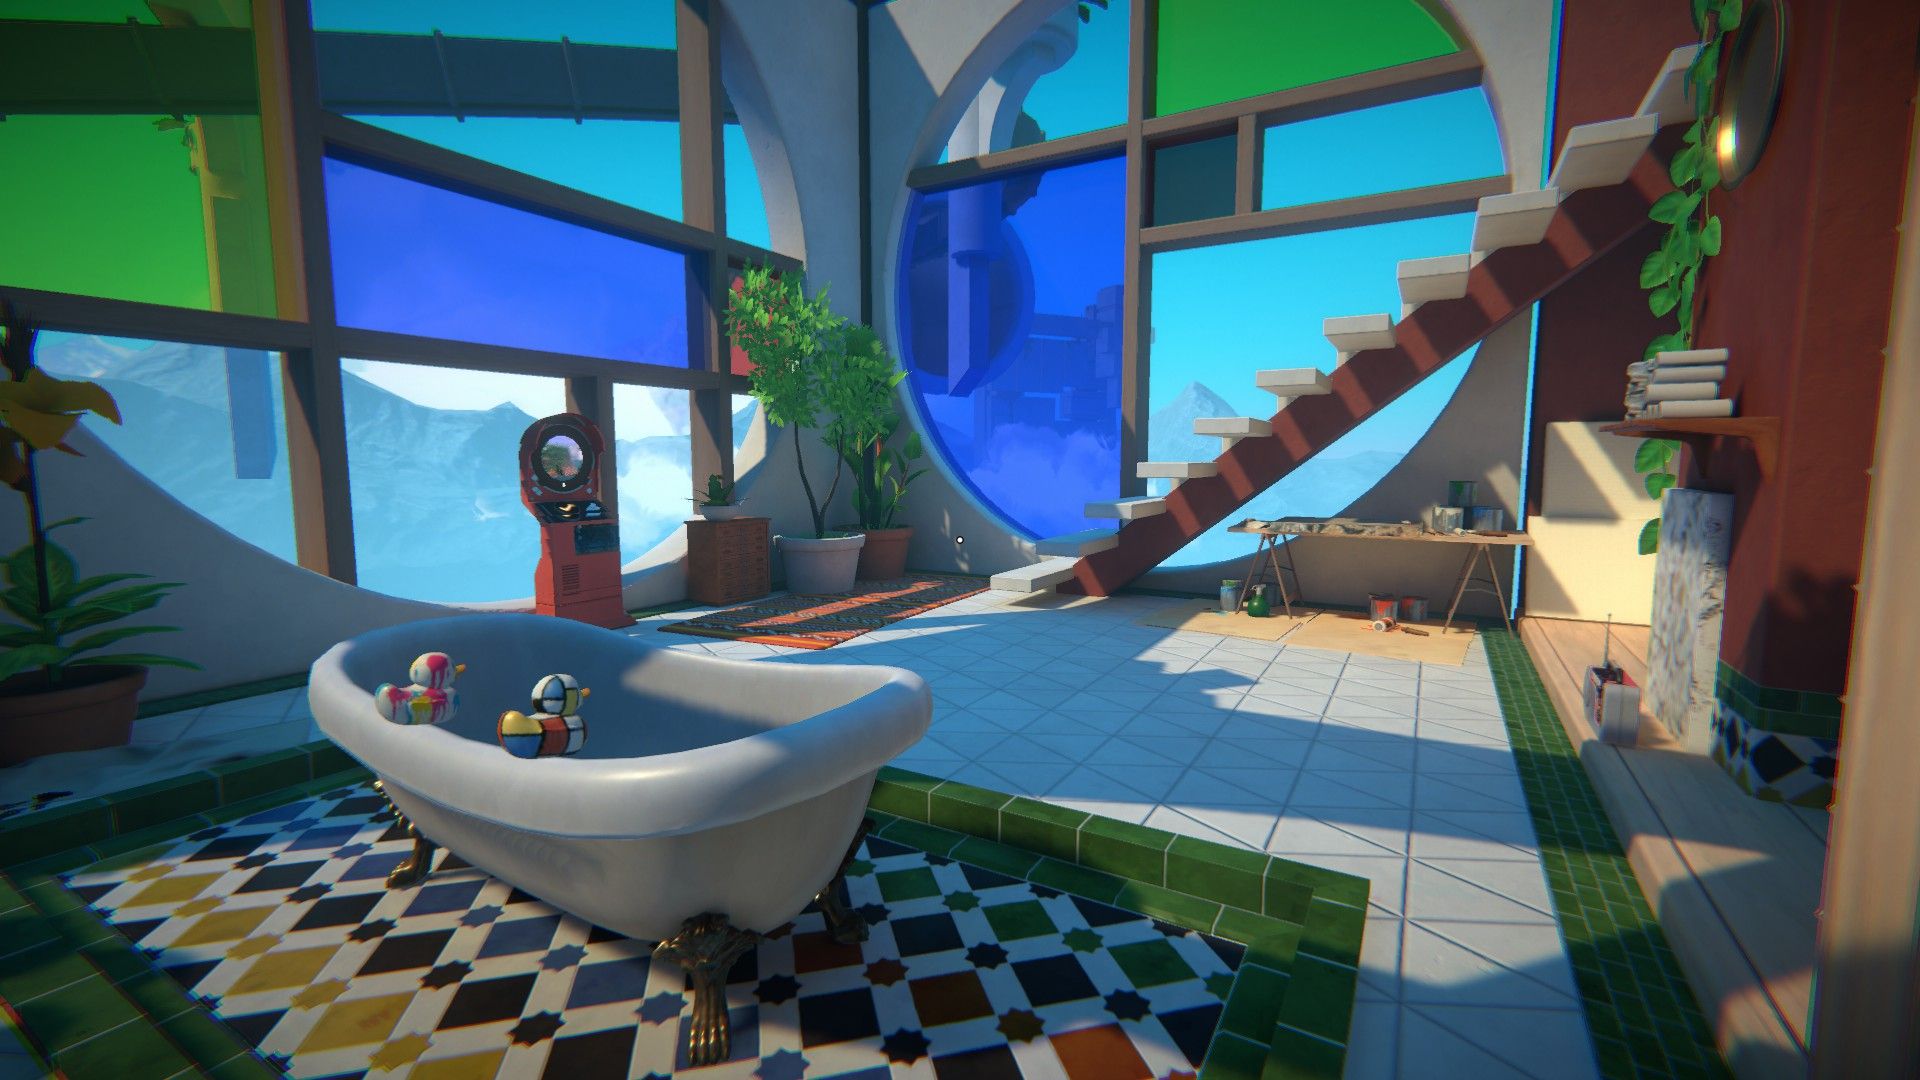 Screenshot of an early part of the game.  This staging area is very colourful, with green and blue circular stained glass windows, green tiles around a floor standing bath.  There are two white and coloured rubber ducks on the edge of the bath.